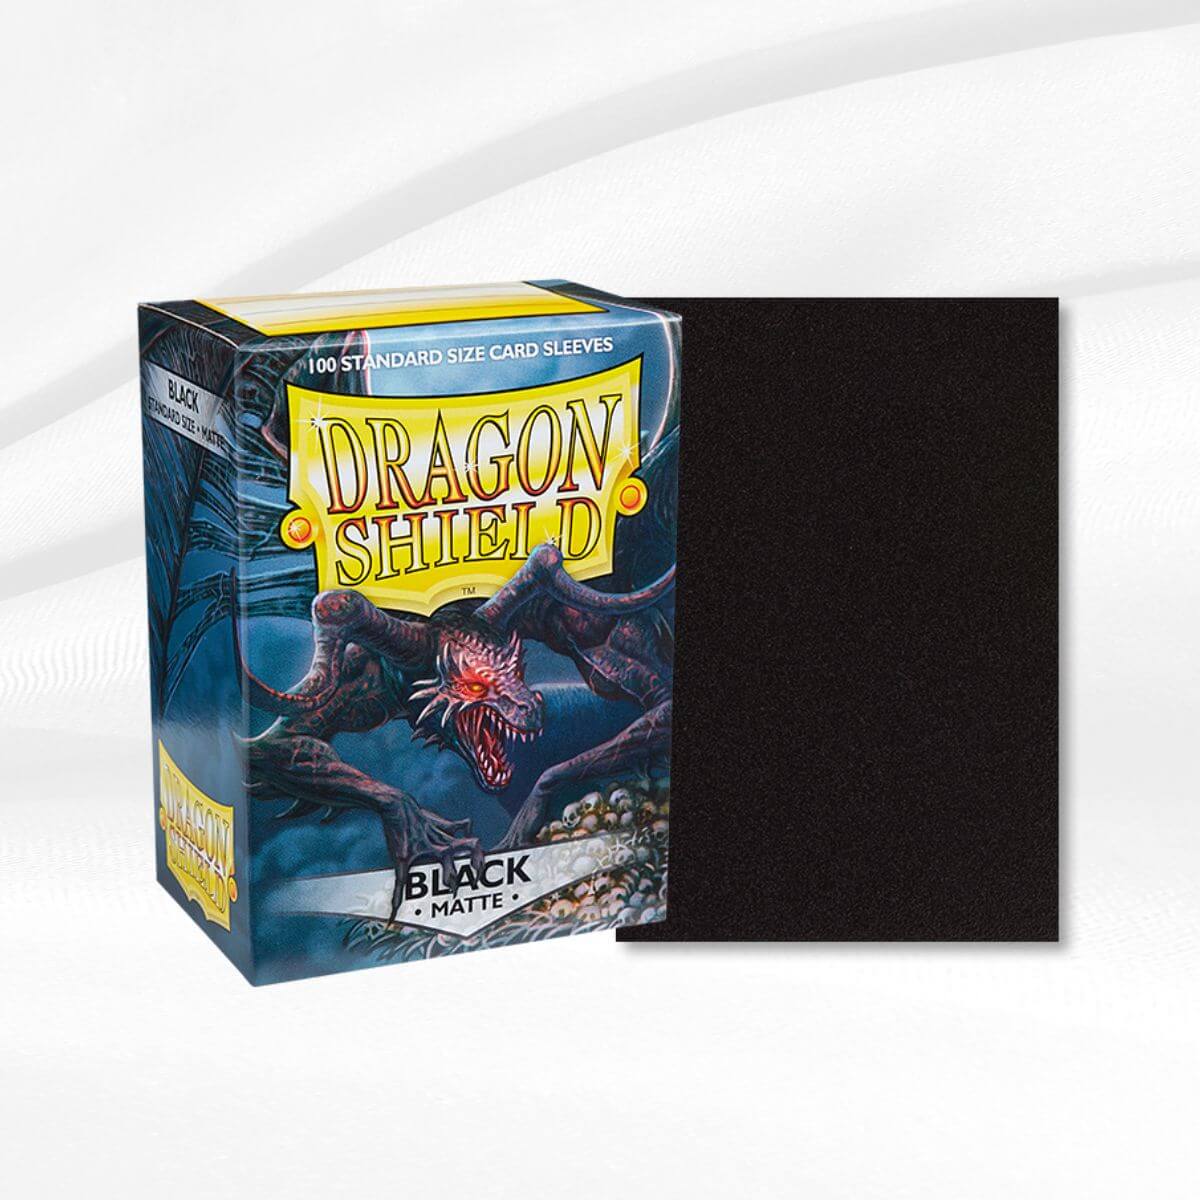 Dragon Shield Sleeves  Best Sleeves for your Cards